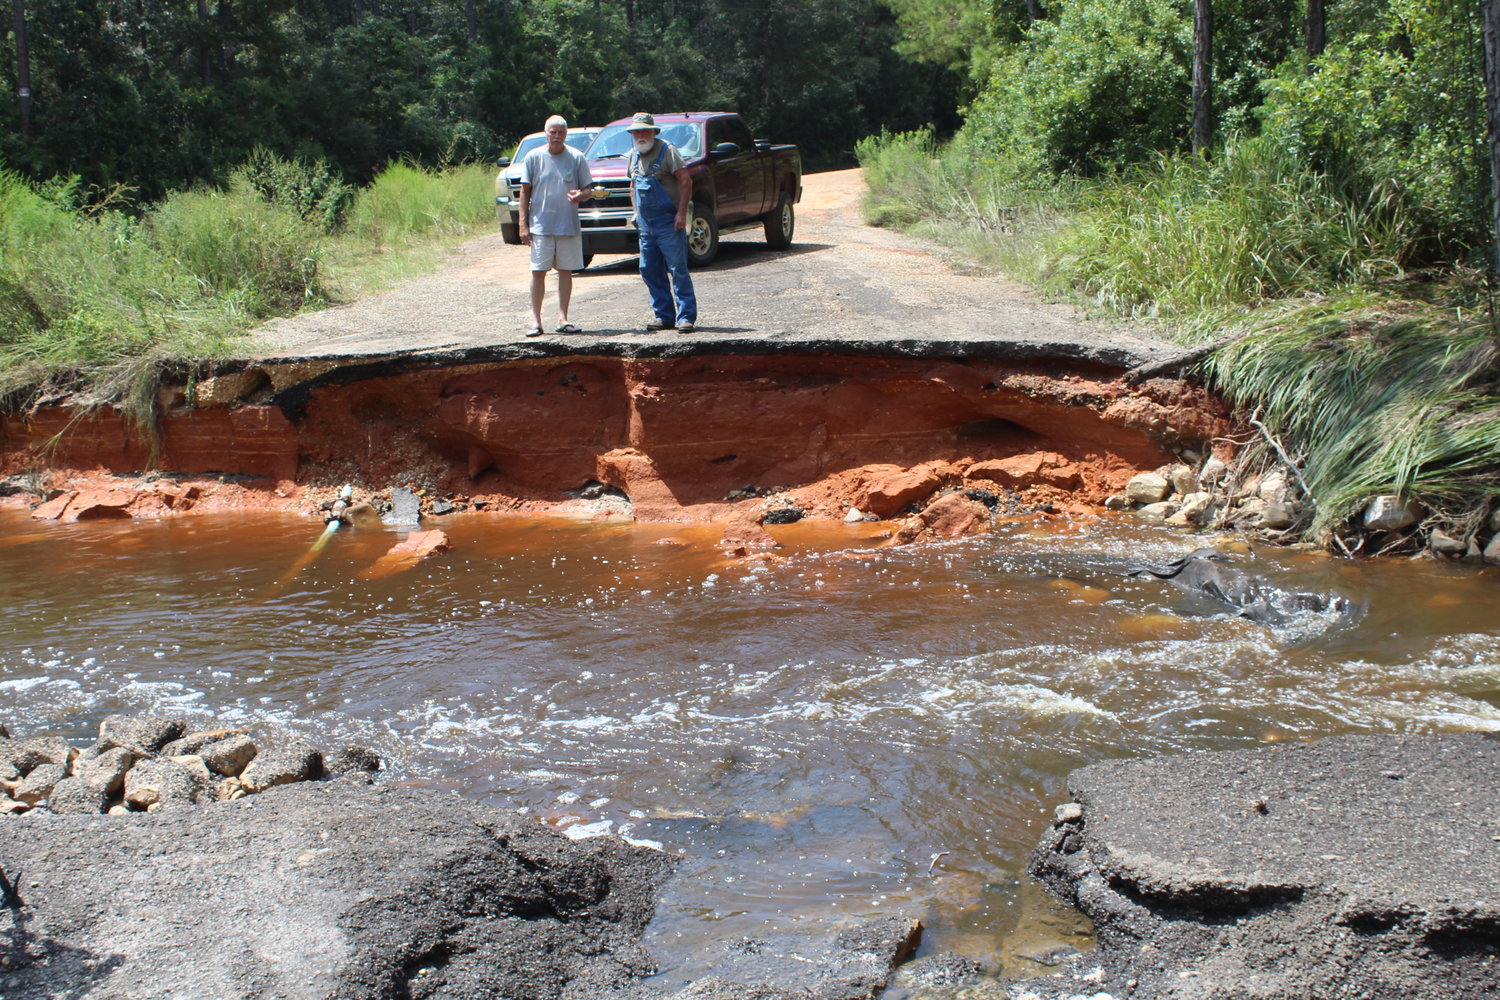 Residents along River Road in the Styx River Community were waiting for officials with the Baldwin County Highway Department on Wednesday, Sept. 1 to inspect and make the road passable.